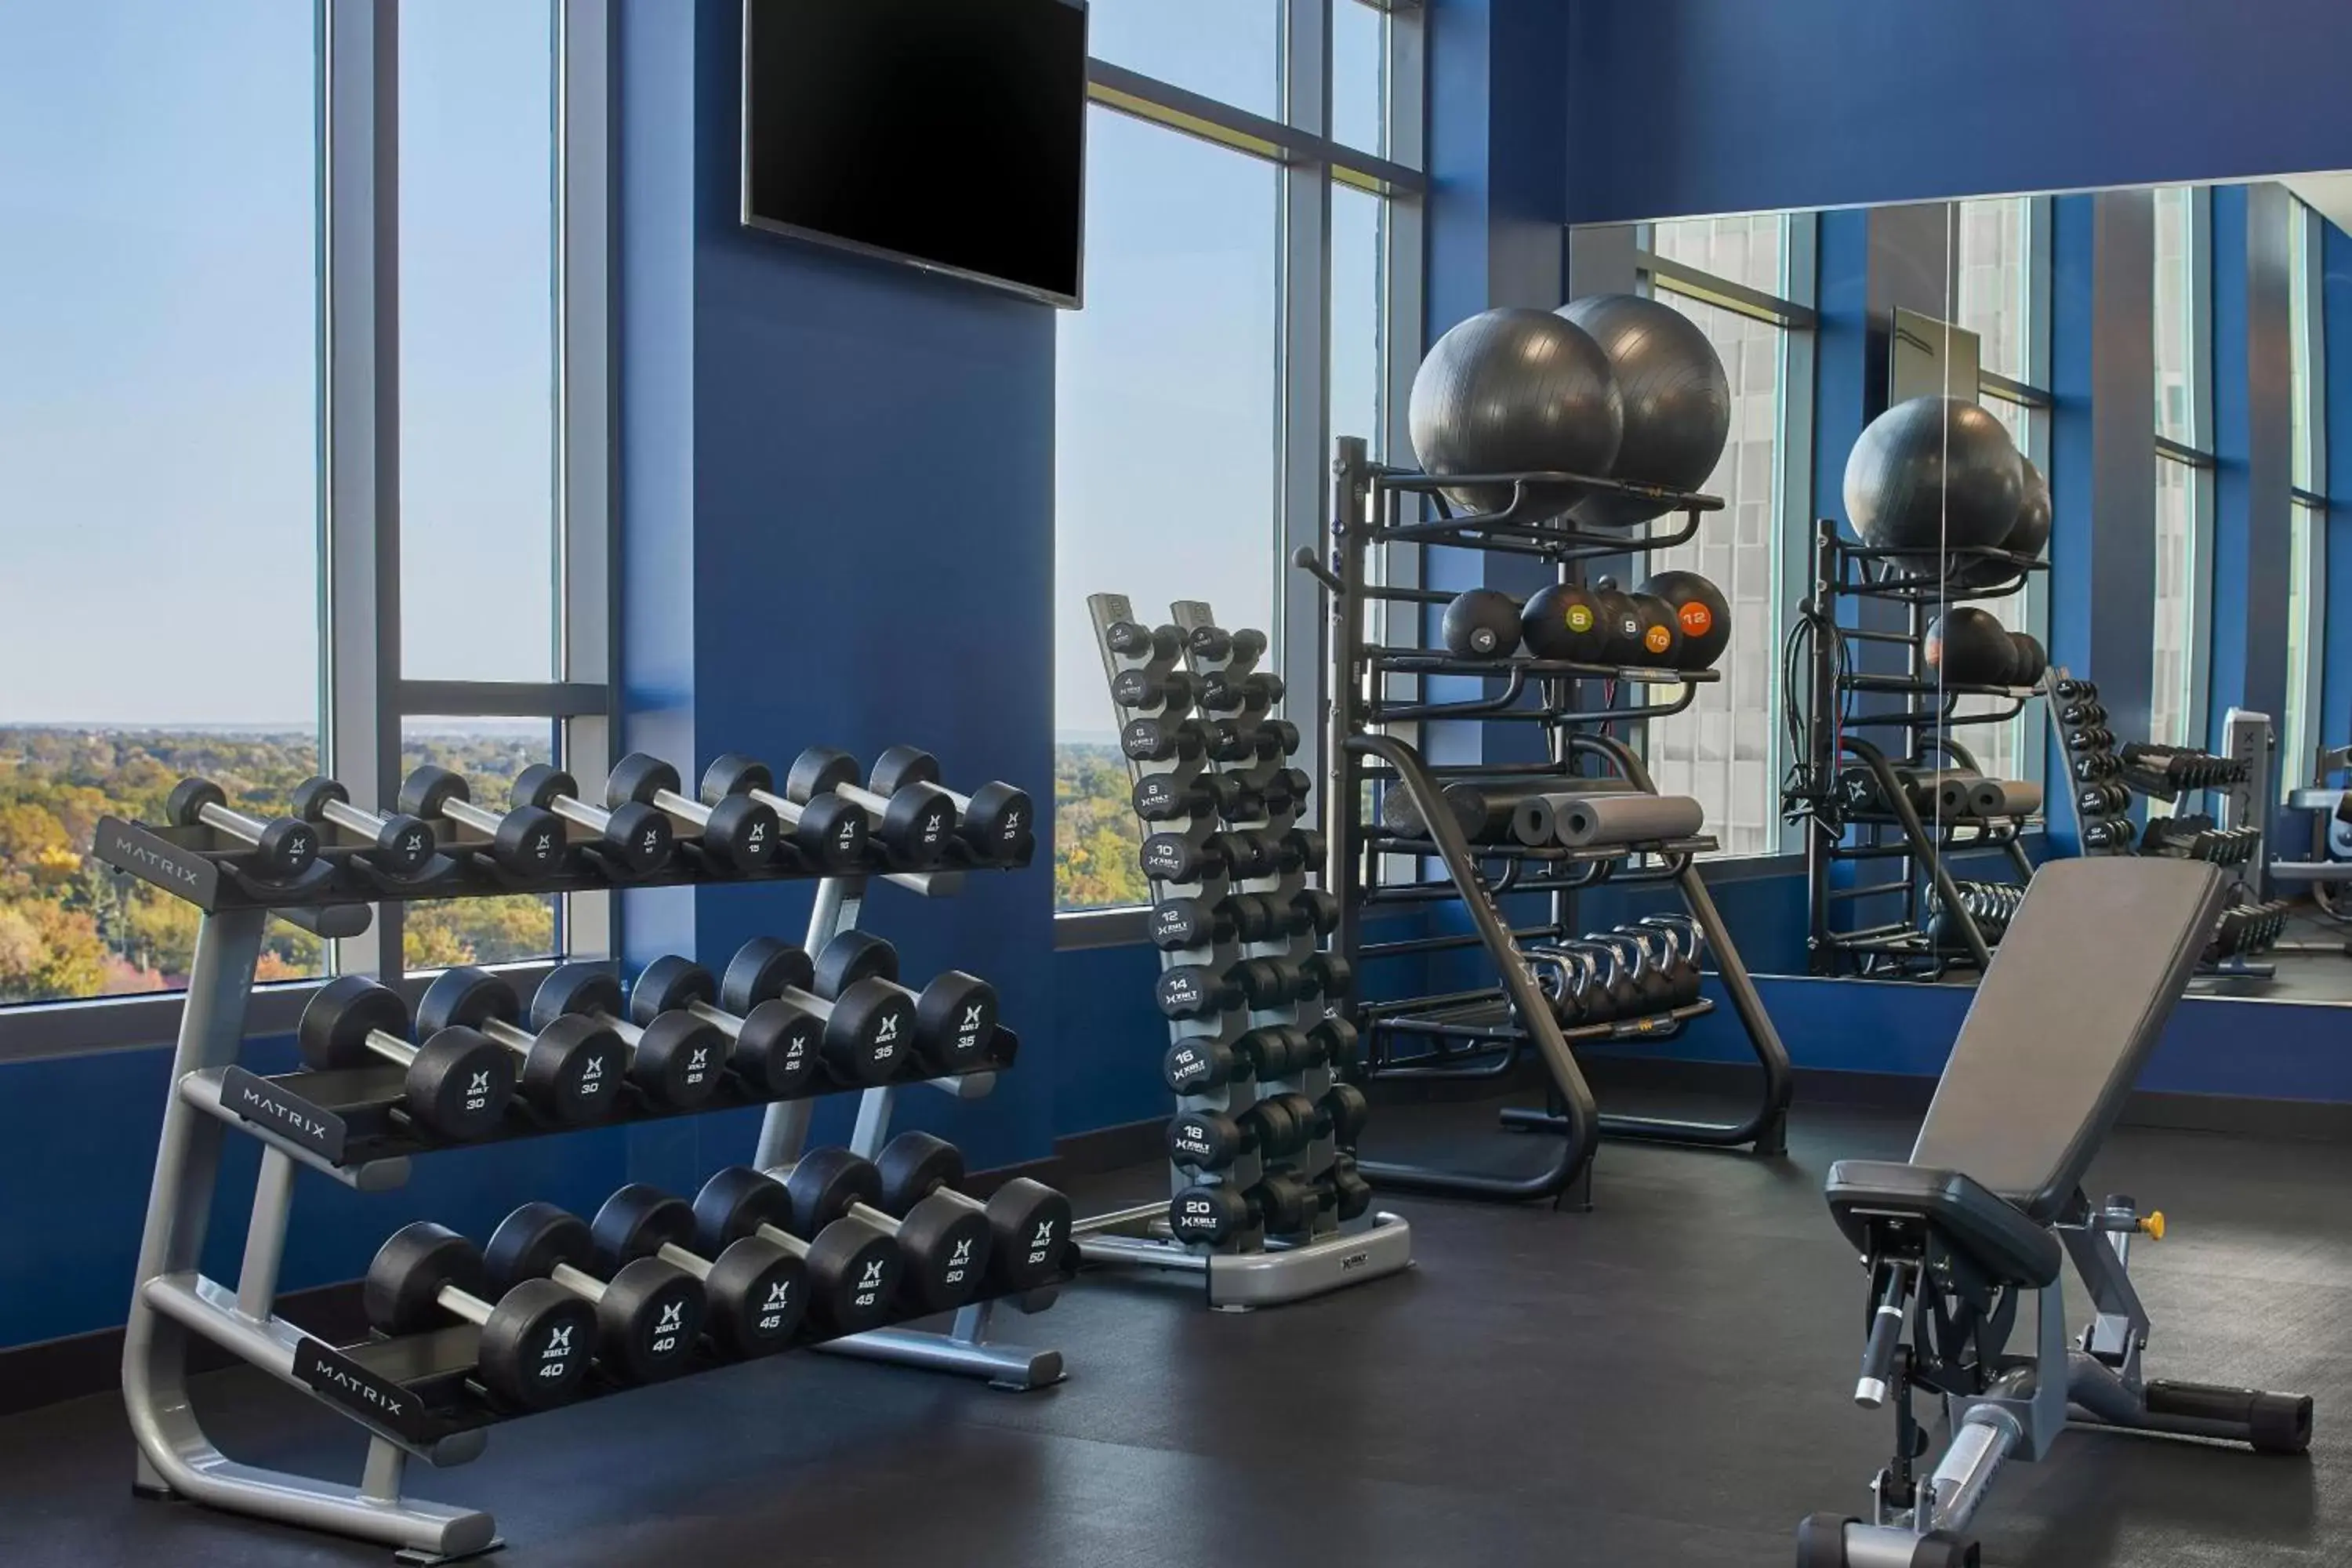 Fitness centre/facilities, Fitness Center/Facilities in Le Méridien St. Louis Clayton